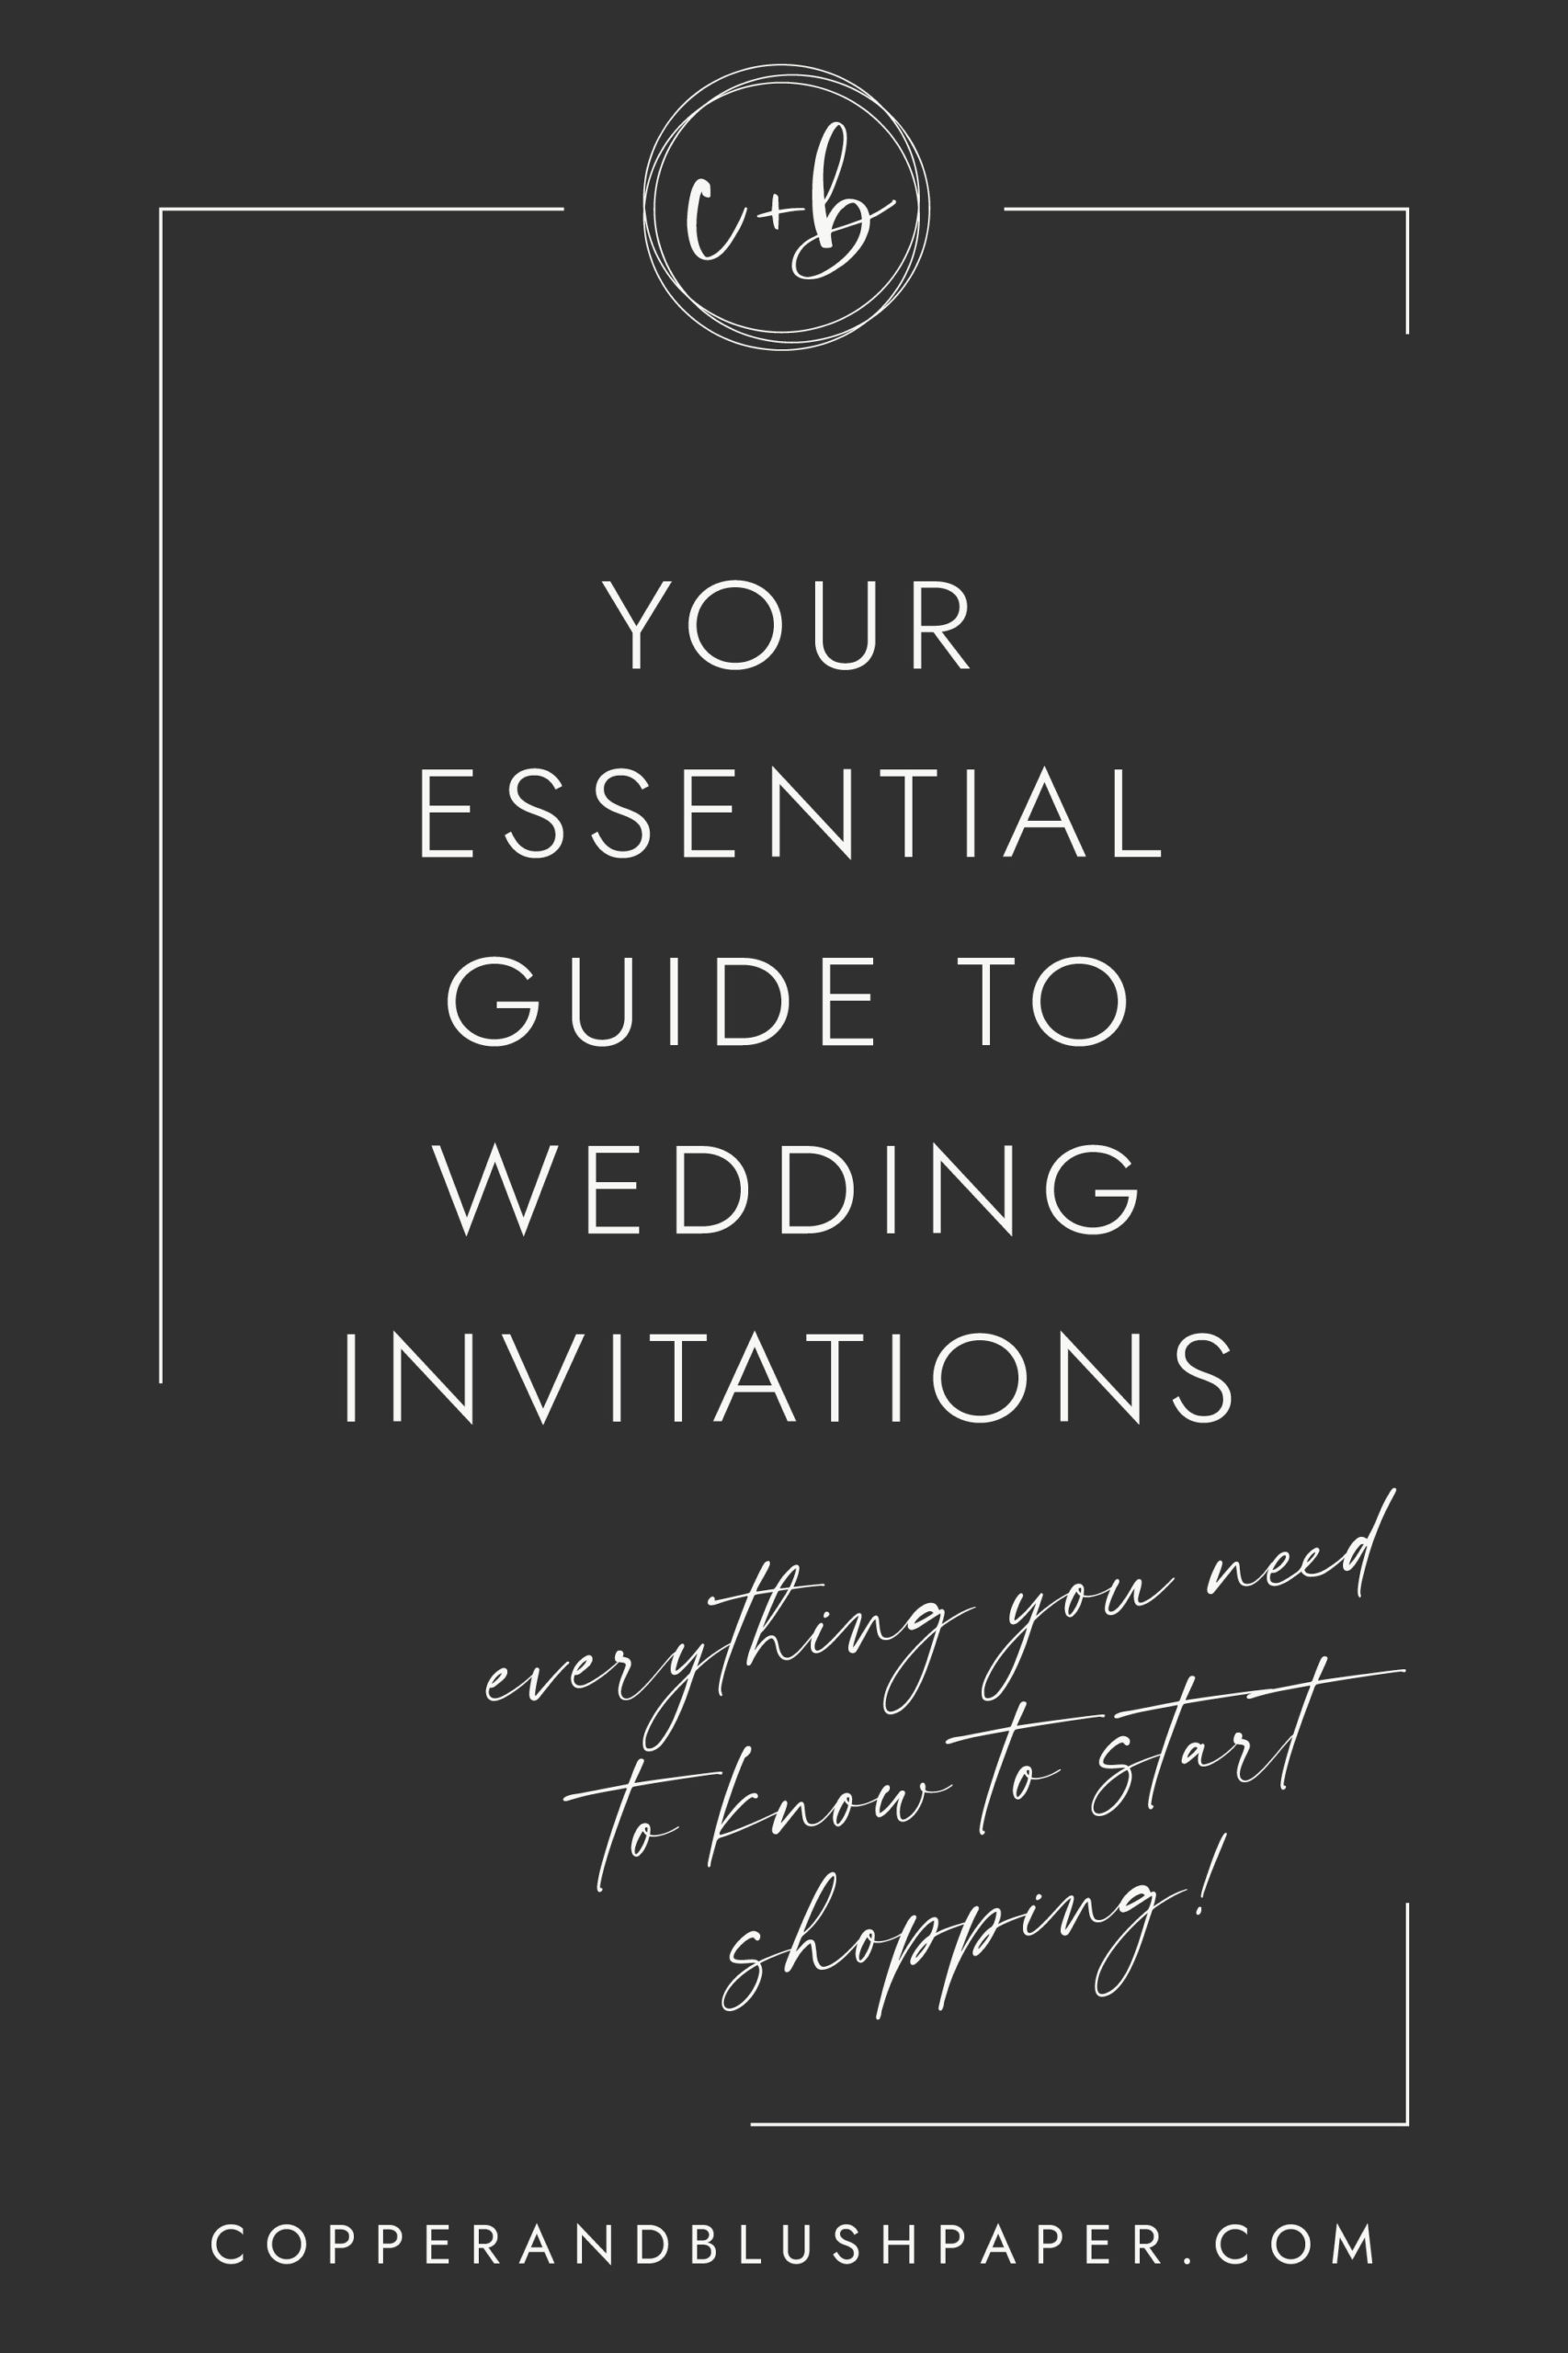 your-essential-guide-to-wedding-invitations-copperandblushpaper